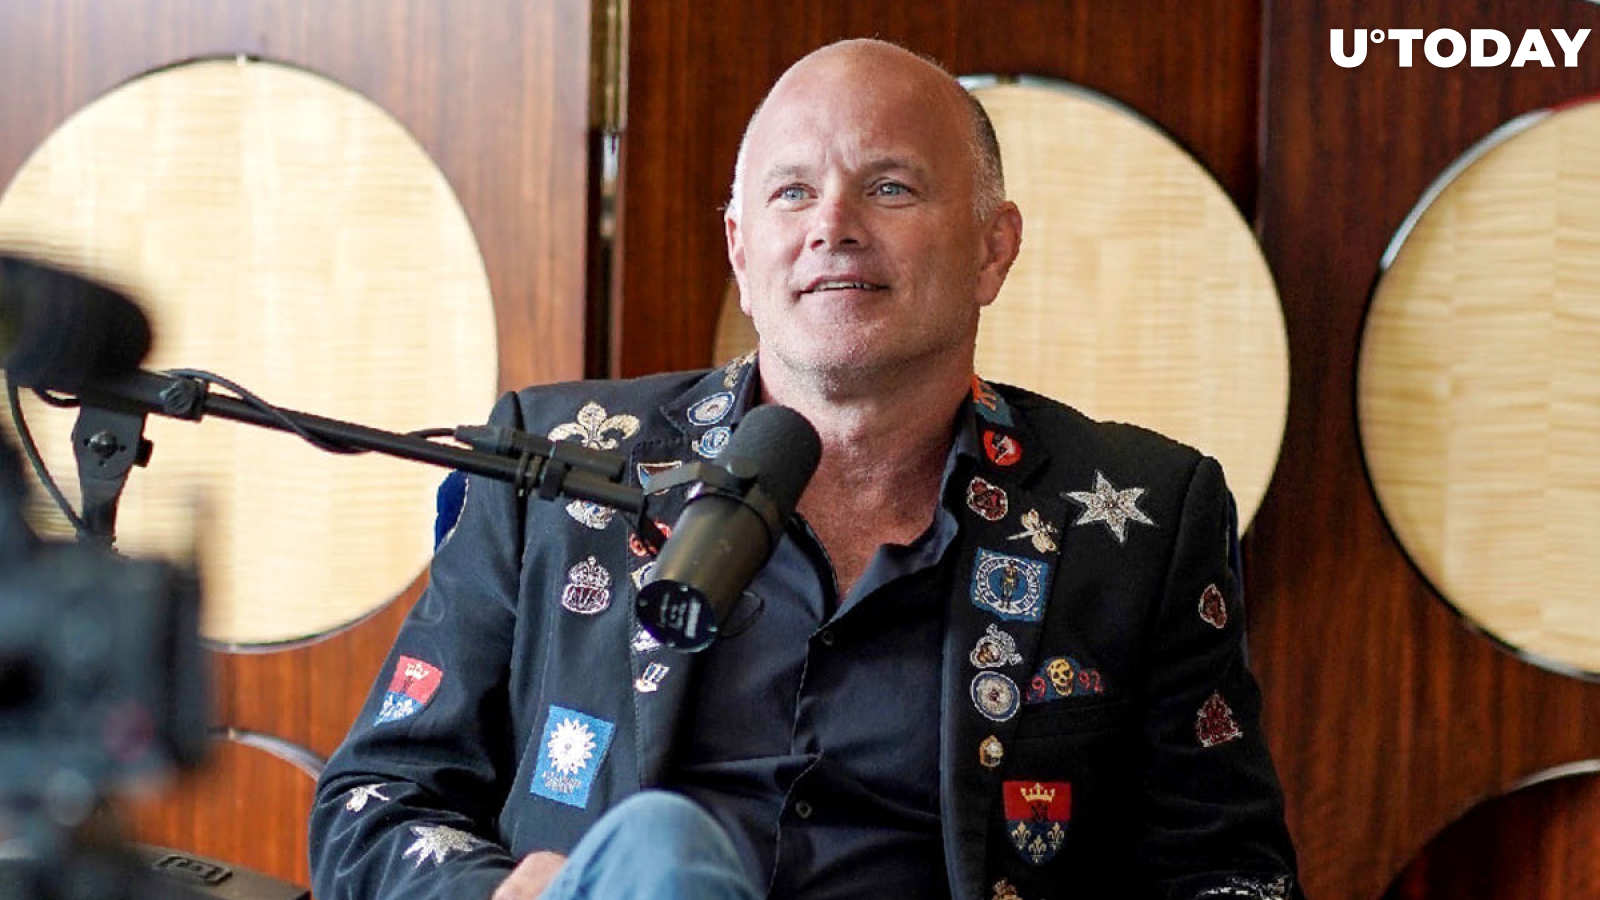 Mike Novogratz Warns About "Total Chaos," with Bitcoin Rocketing to the Moon and Dollar Crashing